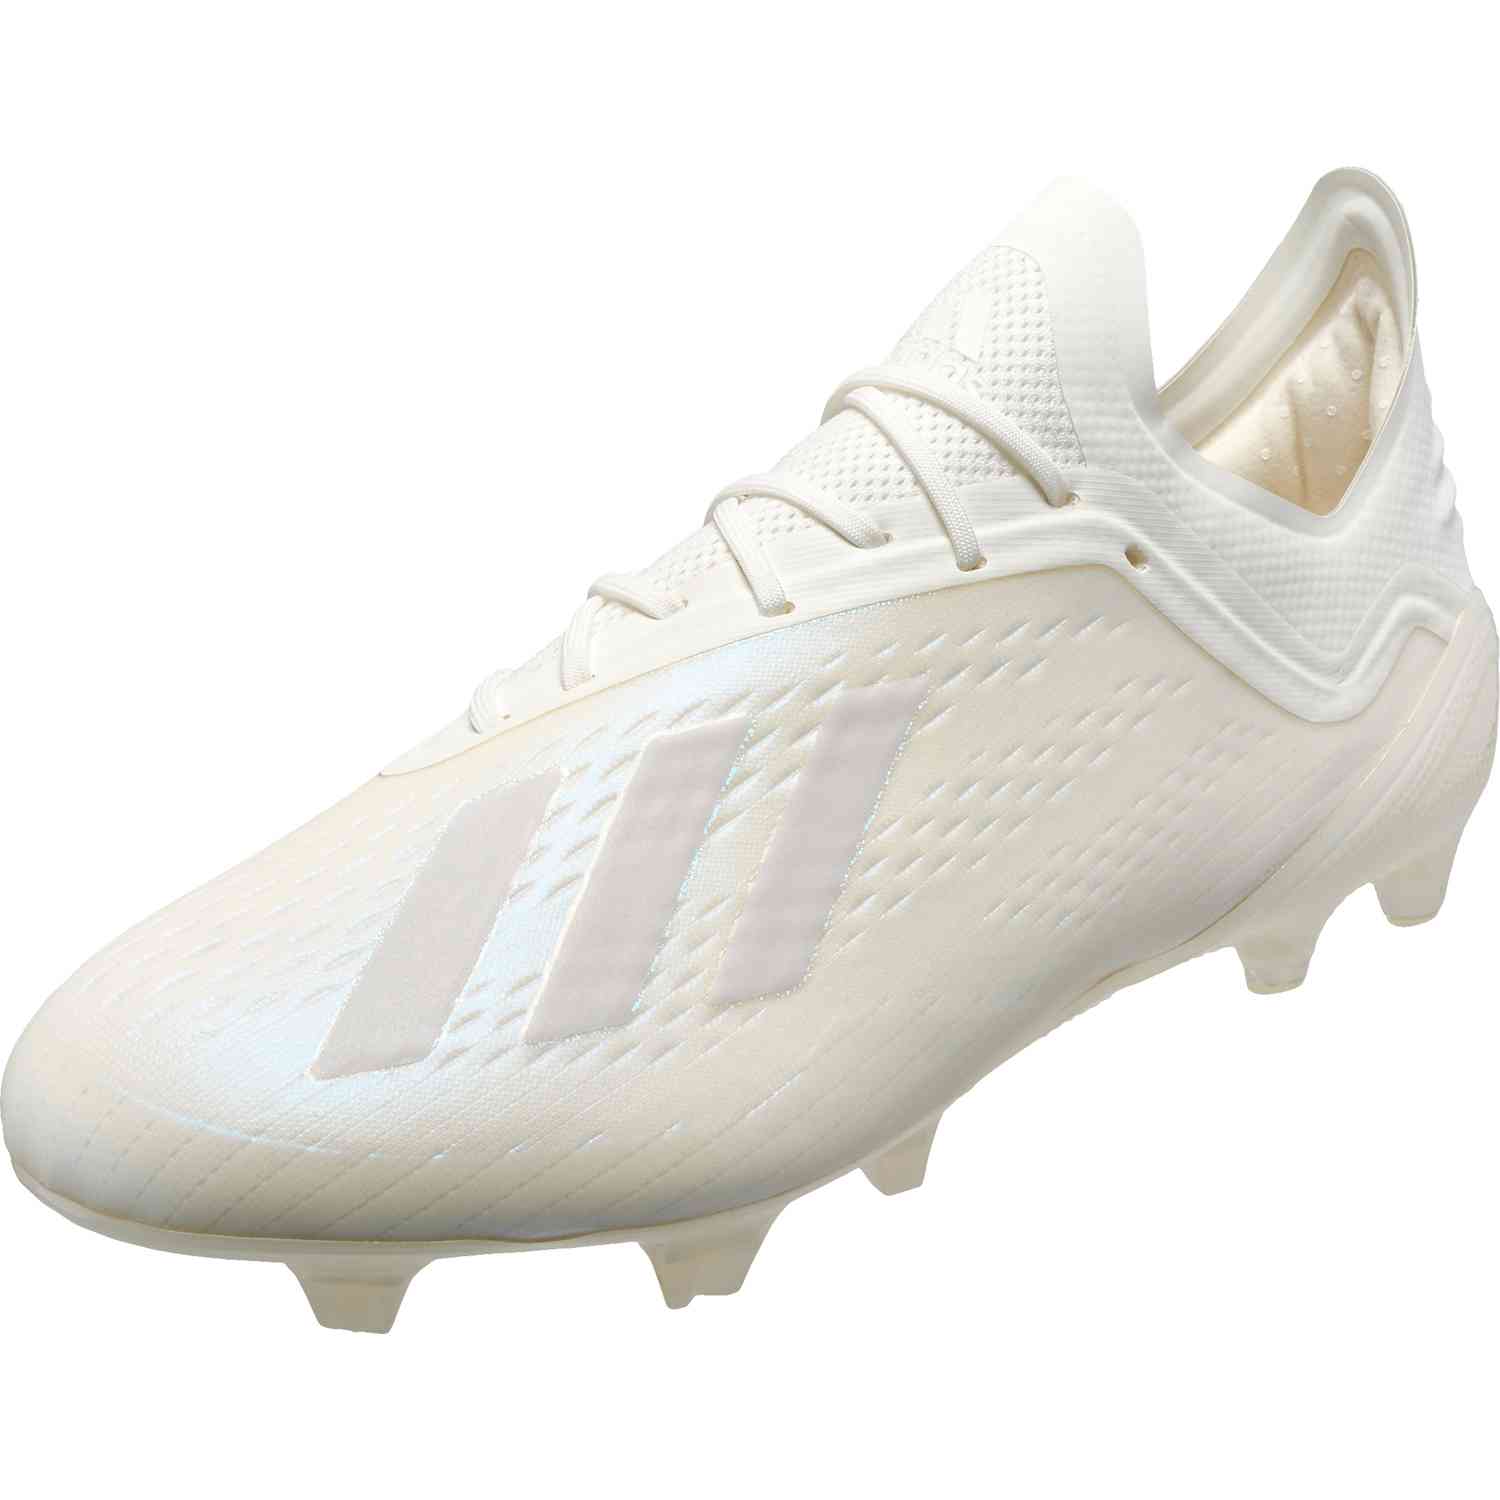 All White Adidas Soccer Cleats | atelier-yuwa.ciao.jp